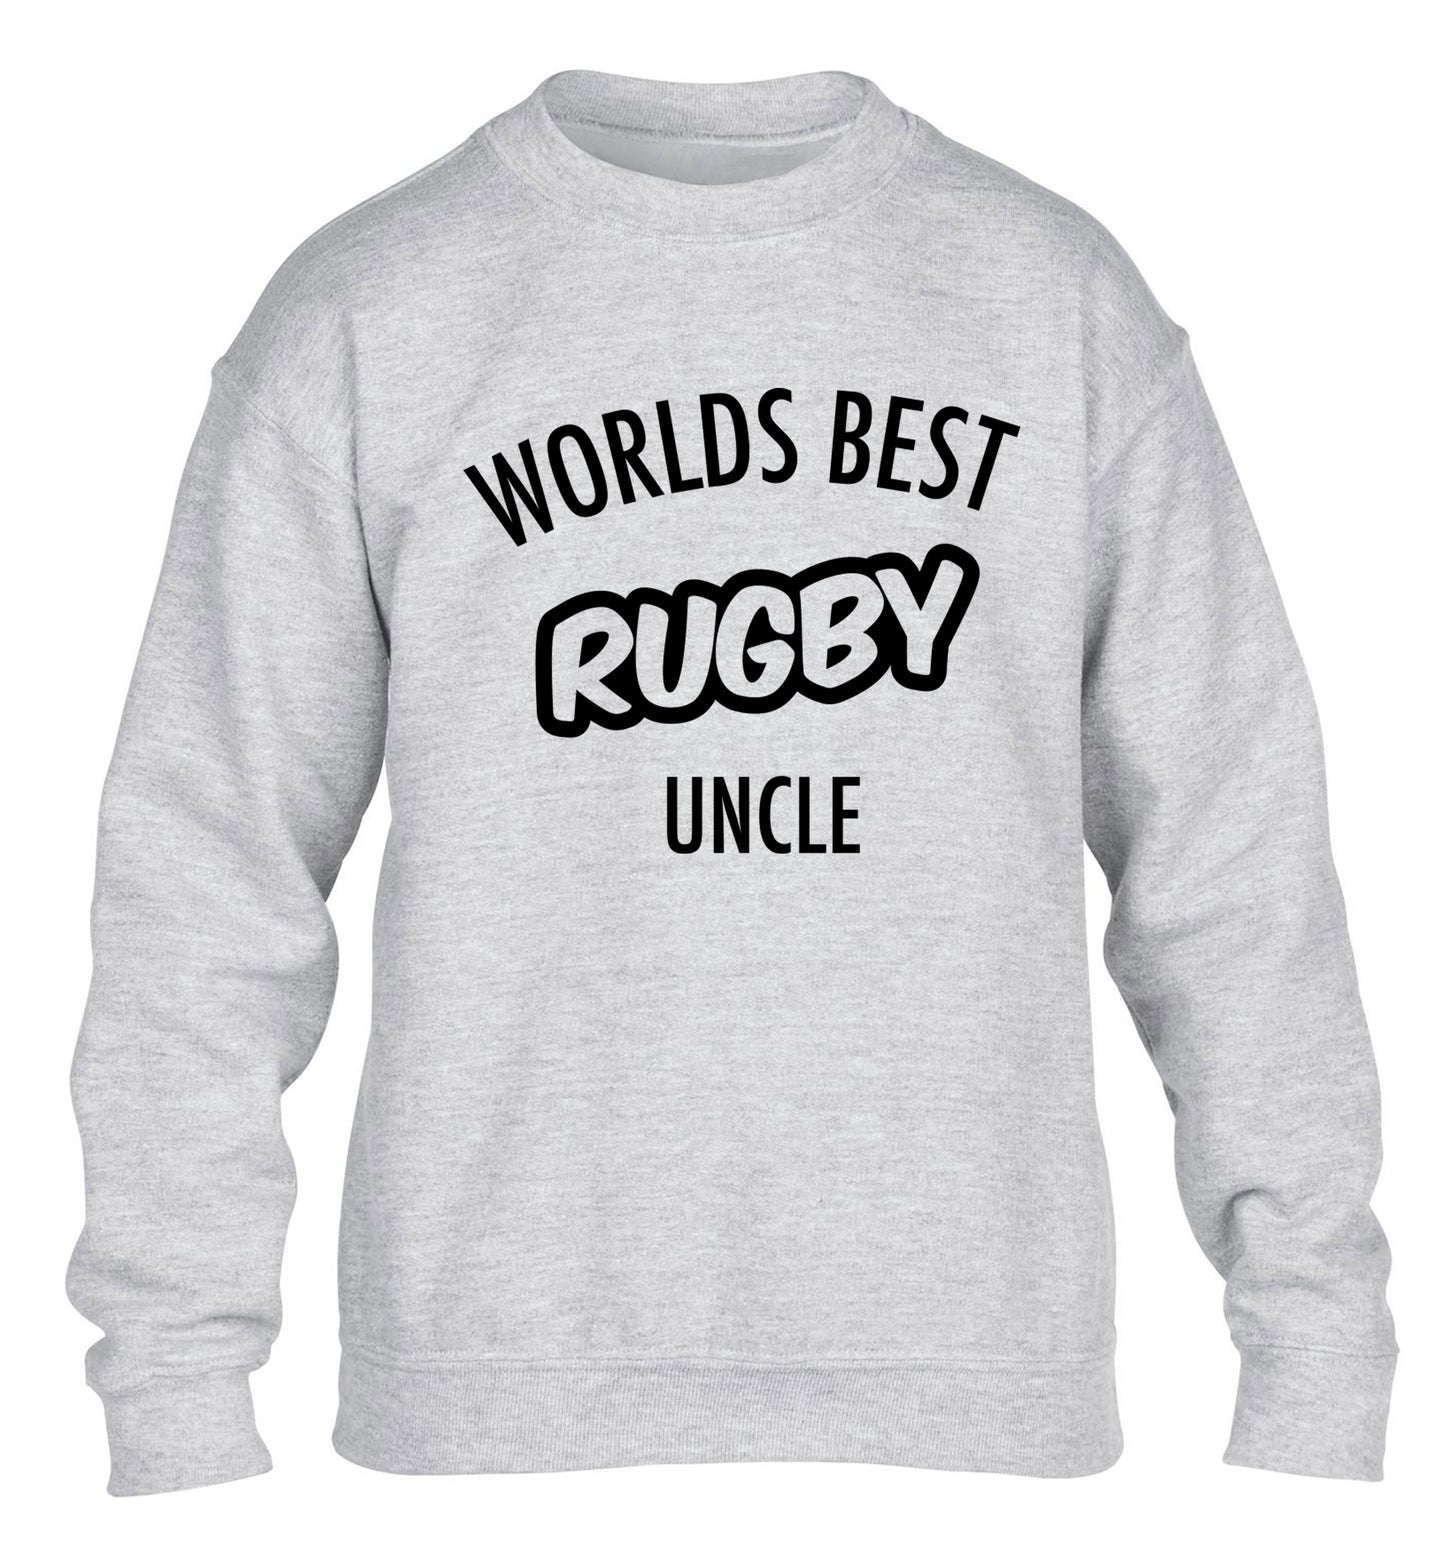 Worlds best rugby uncle children's grey sweater 12-13 Years